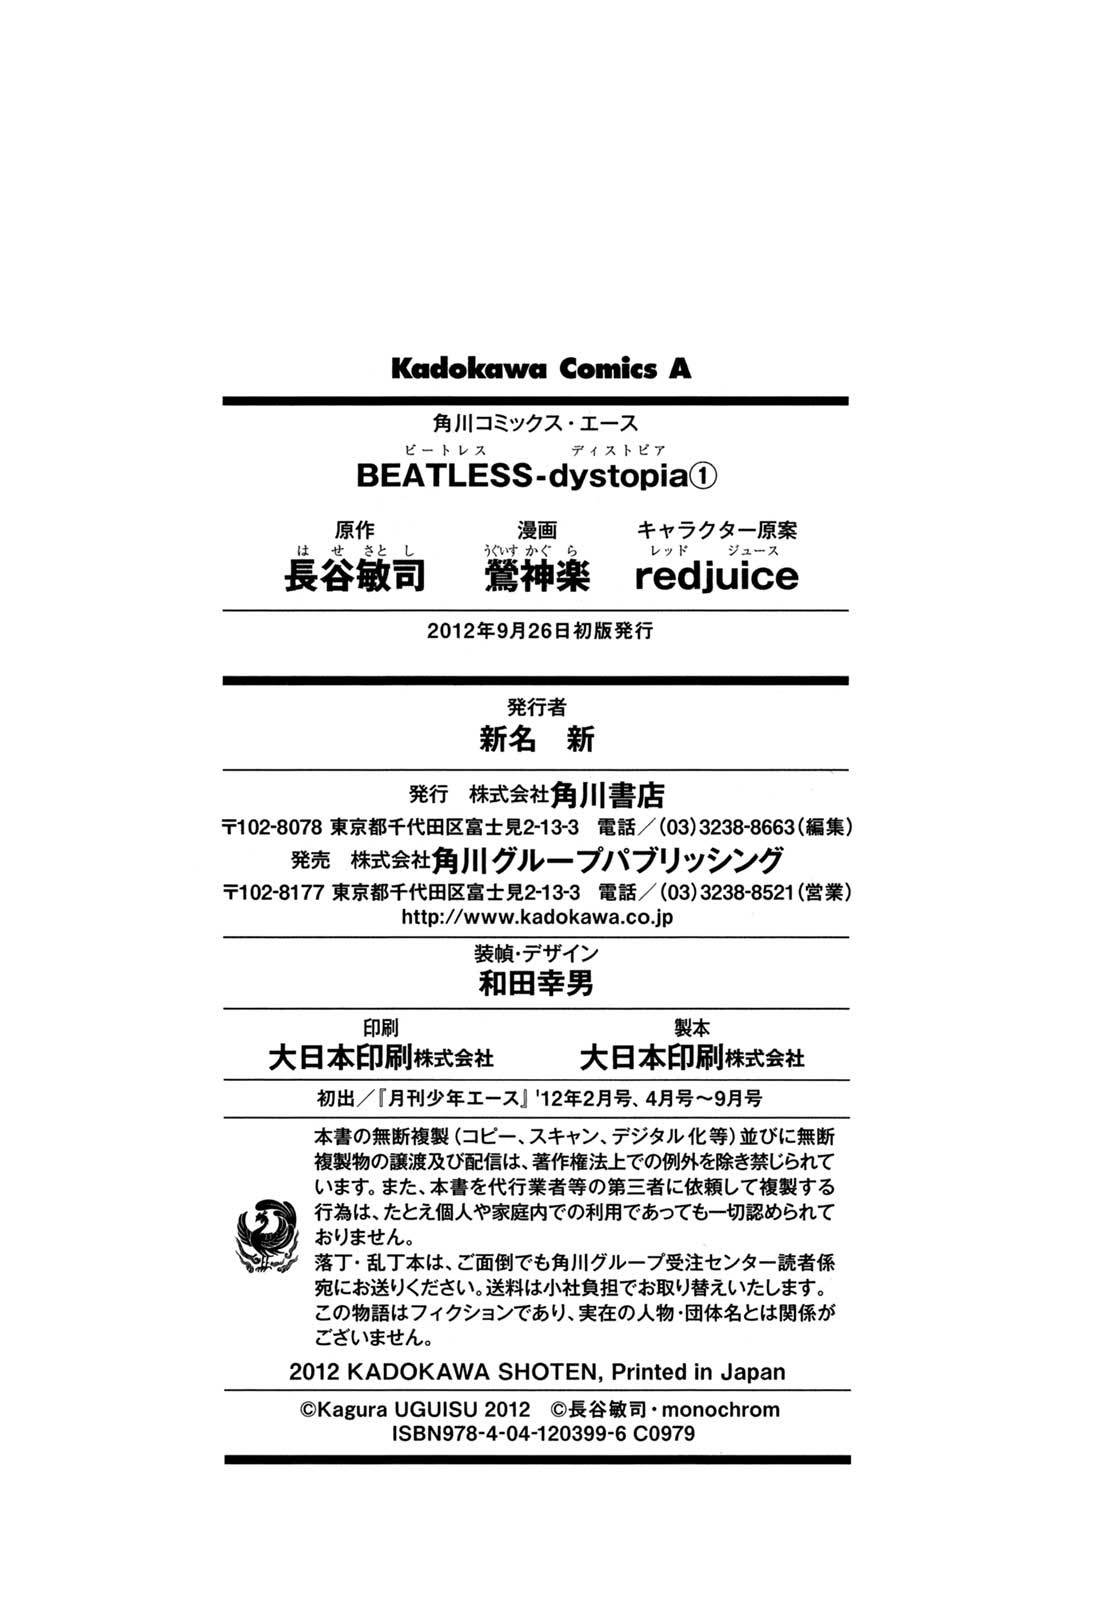 Beatles: Dystopia Chapter 06.5